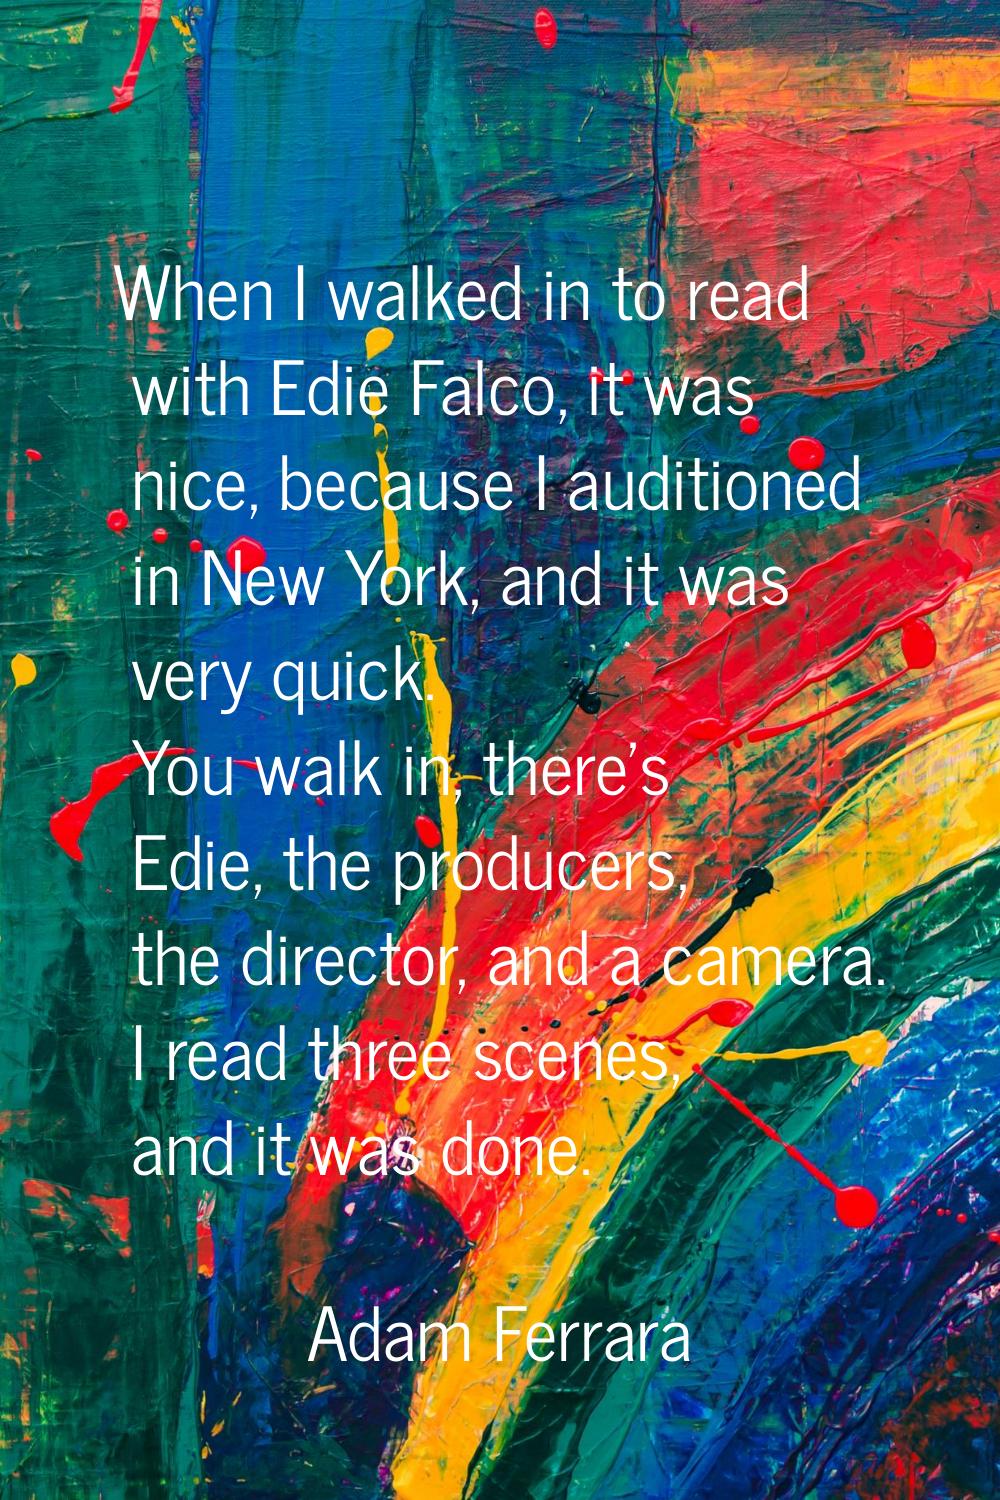 When I walked in to read with Edie Falco, it was nice, because I auditioned in New York, and it was